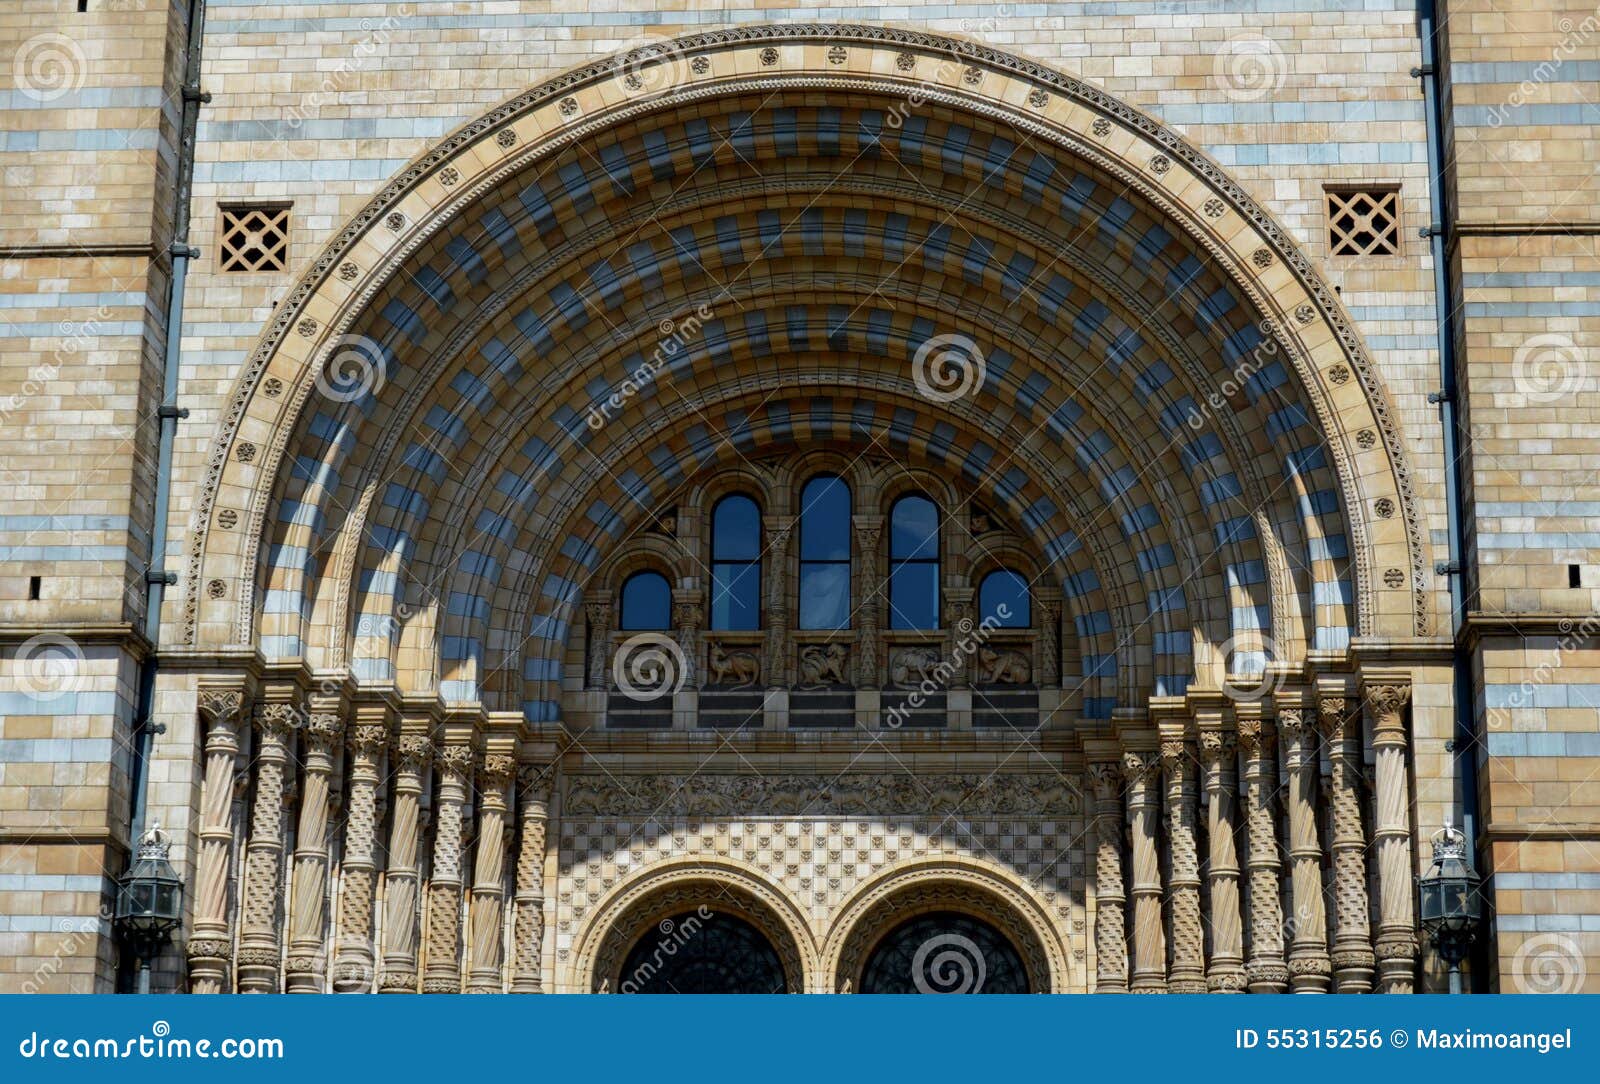 the natural history museum in london, uk